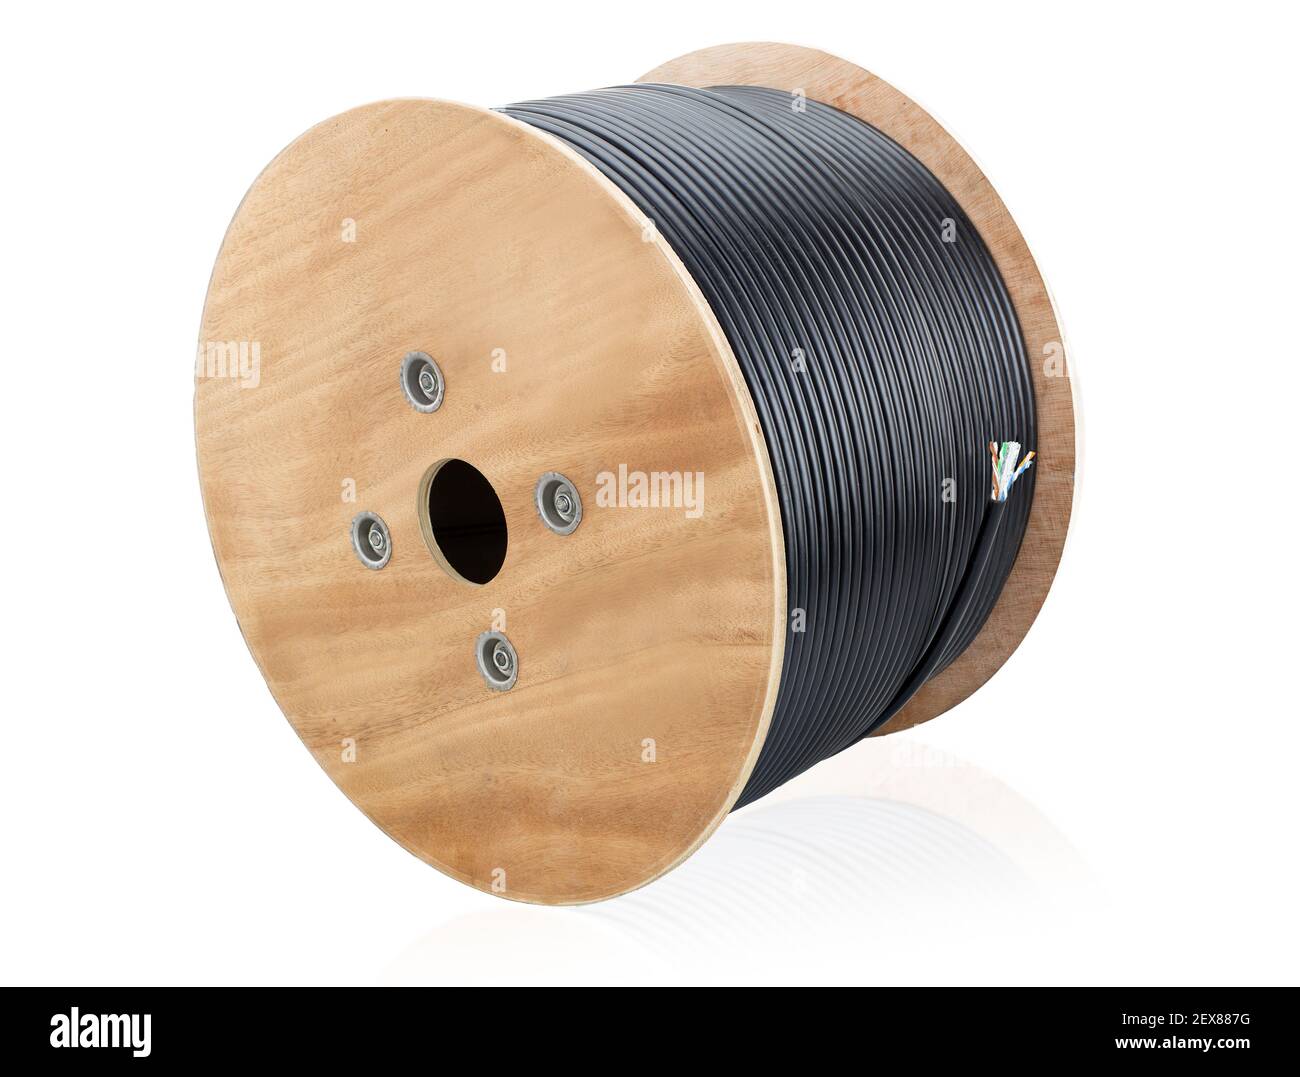 Copper wire spool Cut Out Stock Images & Pictures - Alamy